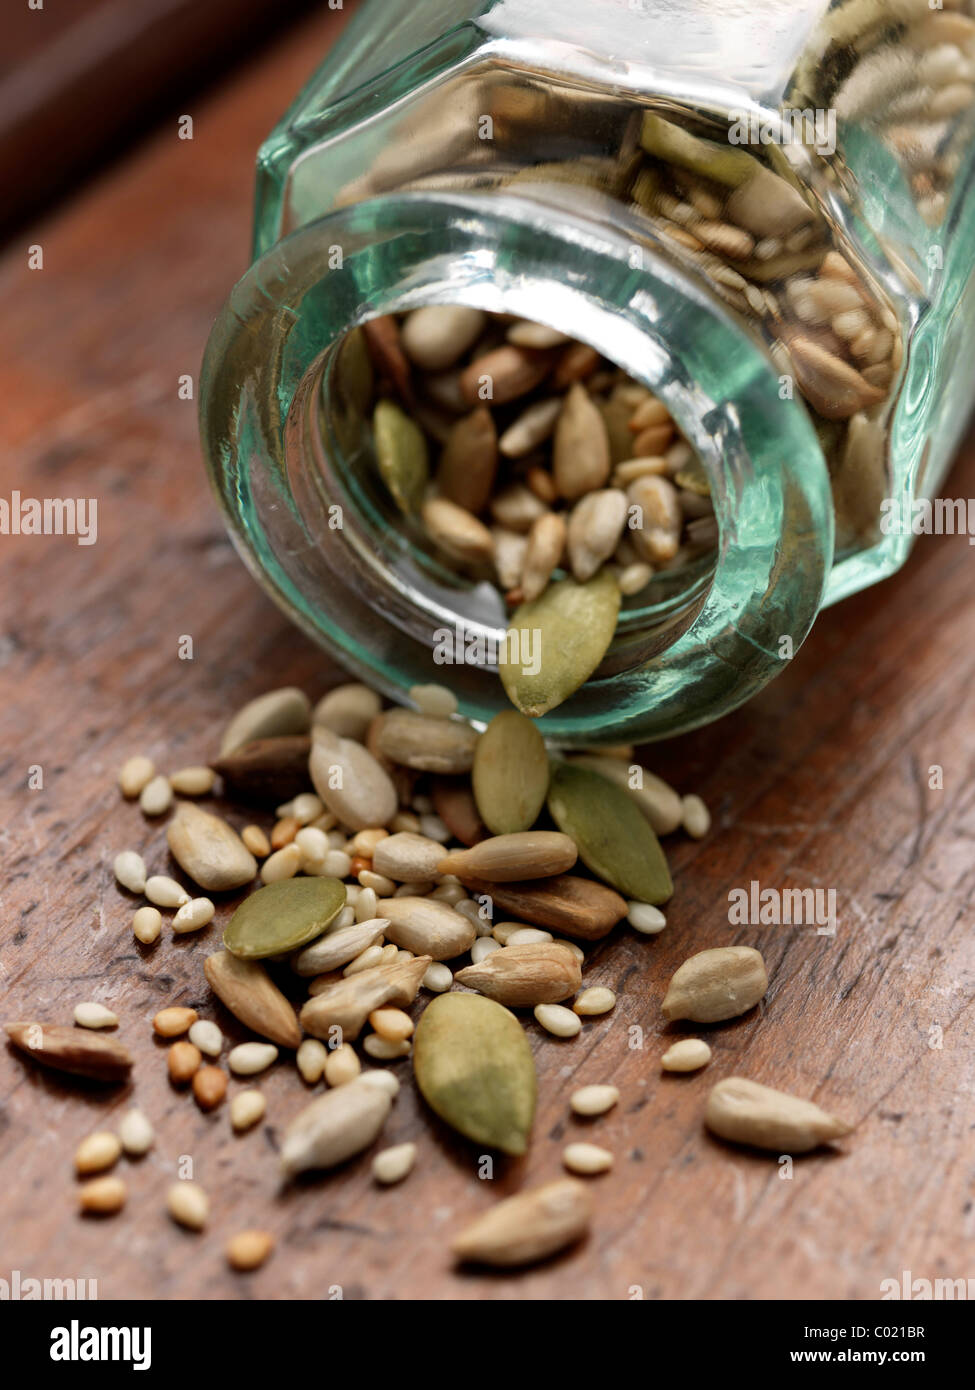 Glass bottle with various seeds Stock Photo